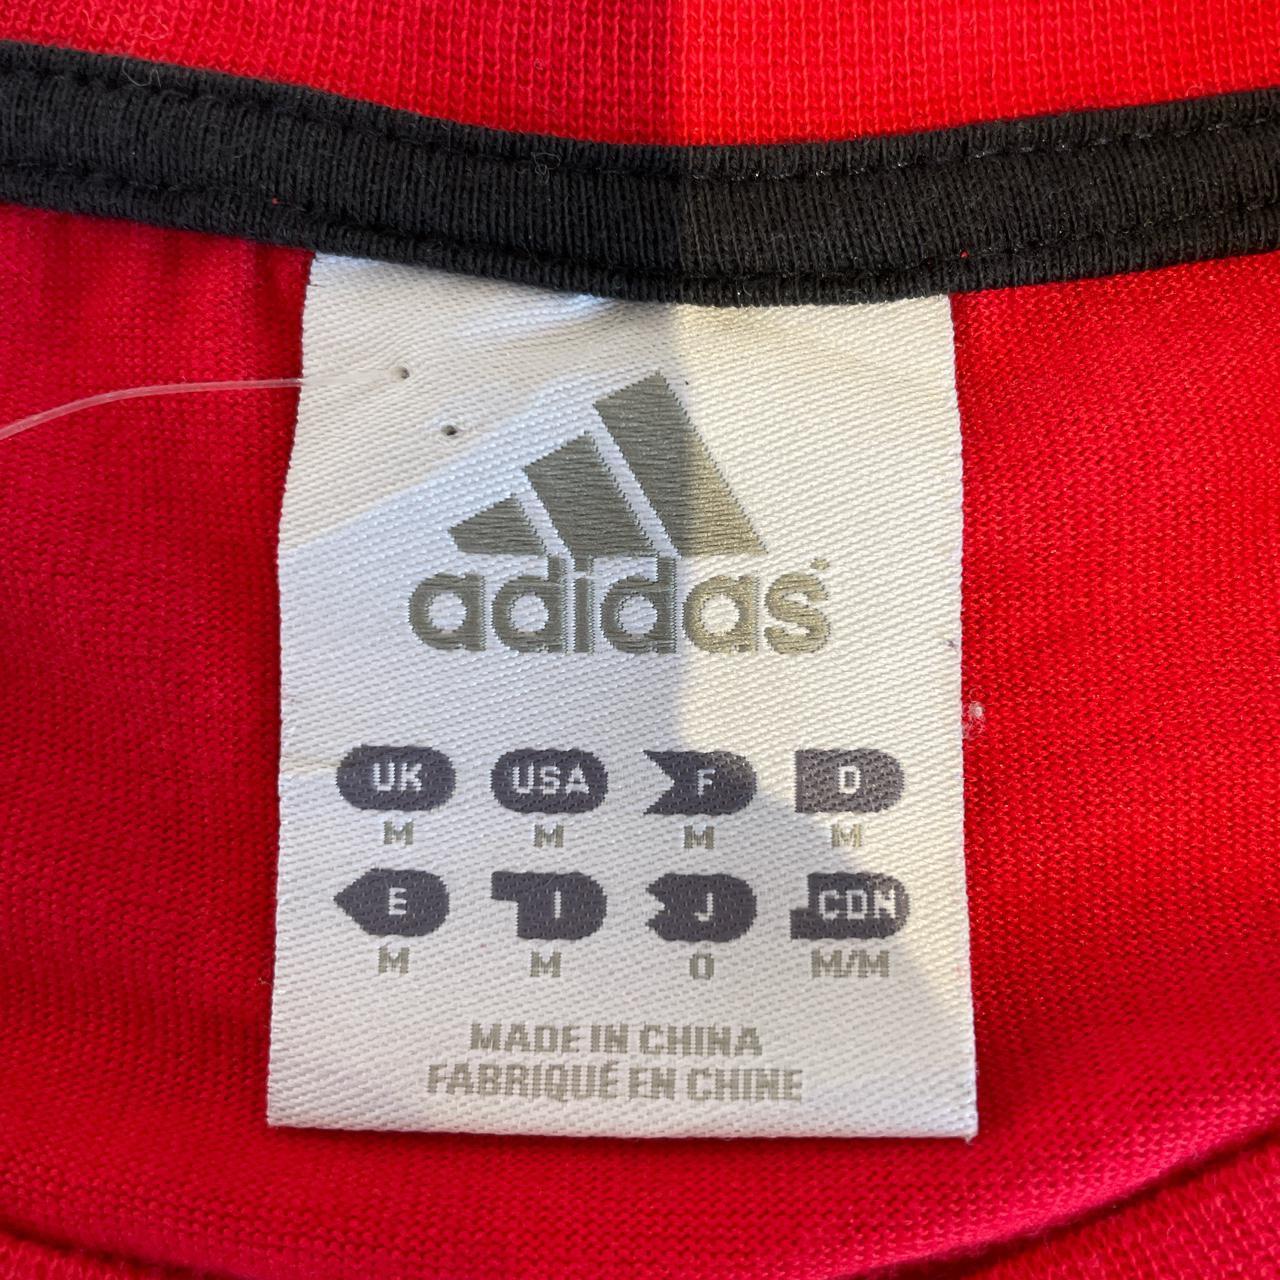 Vintage Adidas Embroidered Small Logo T-shirt in Red... - Depop